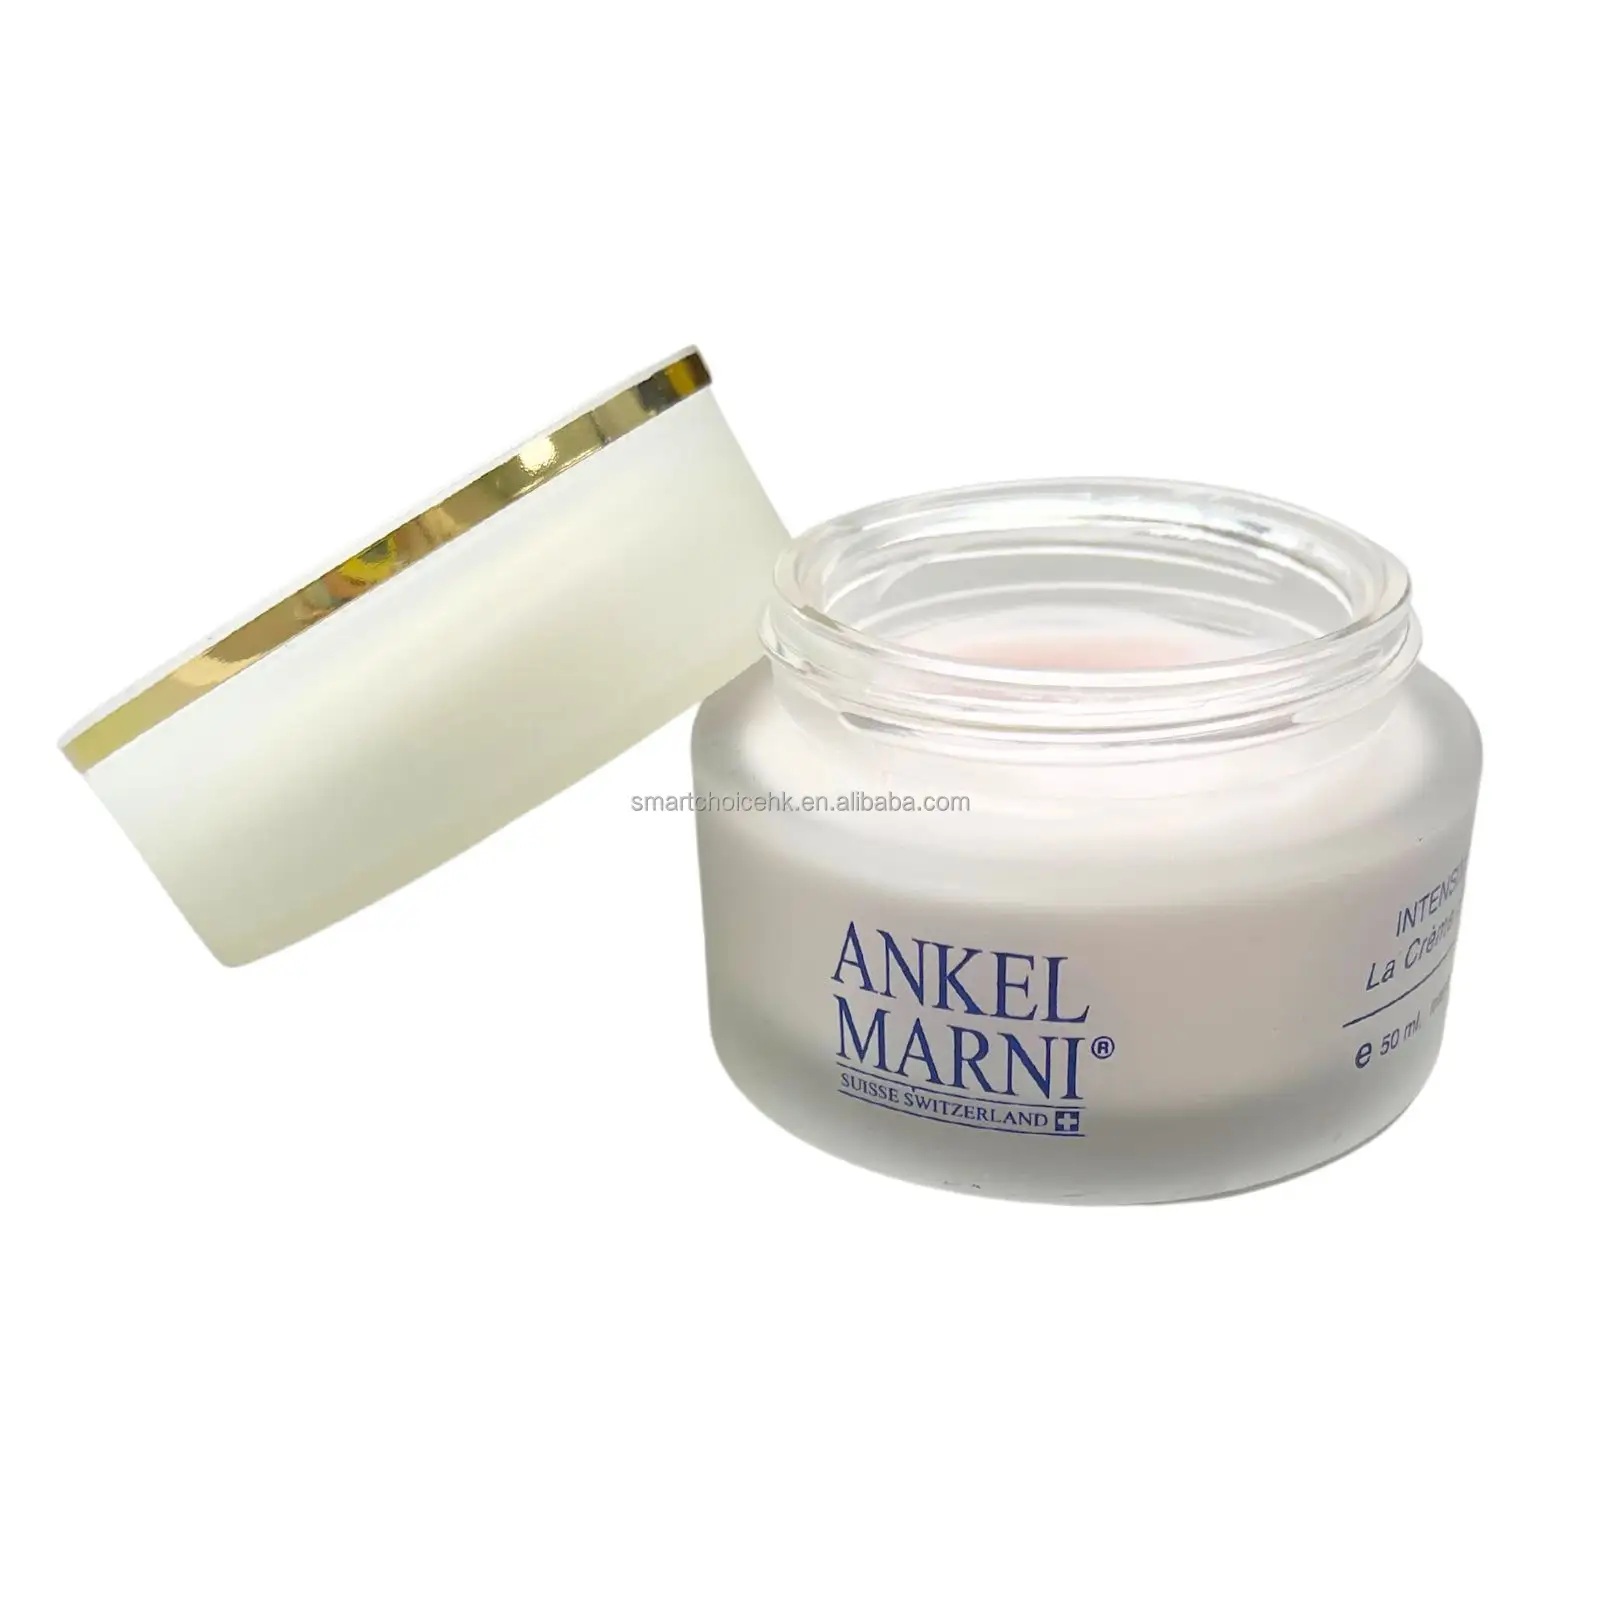 High Quality Swiss Made Branded 50ml Anti Aging Intensive lifting Face Cream Anti-wrinkle Face Cream & Lotion